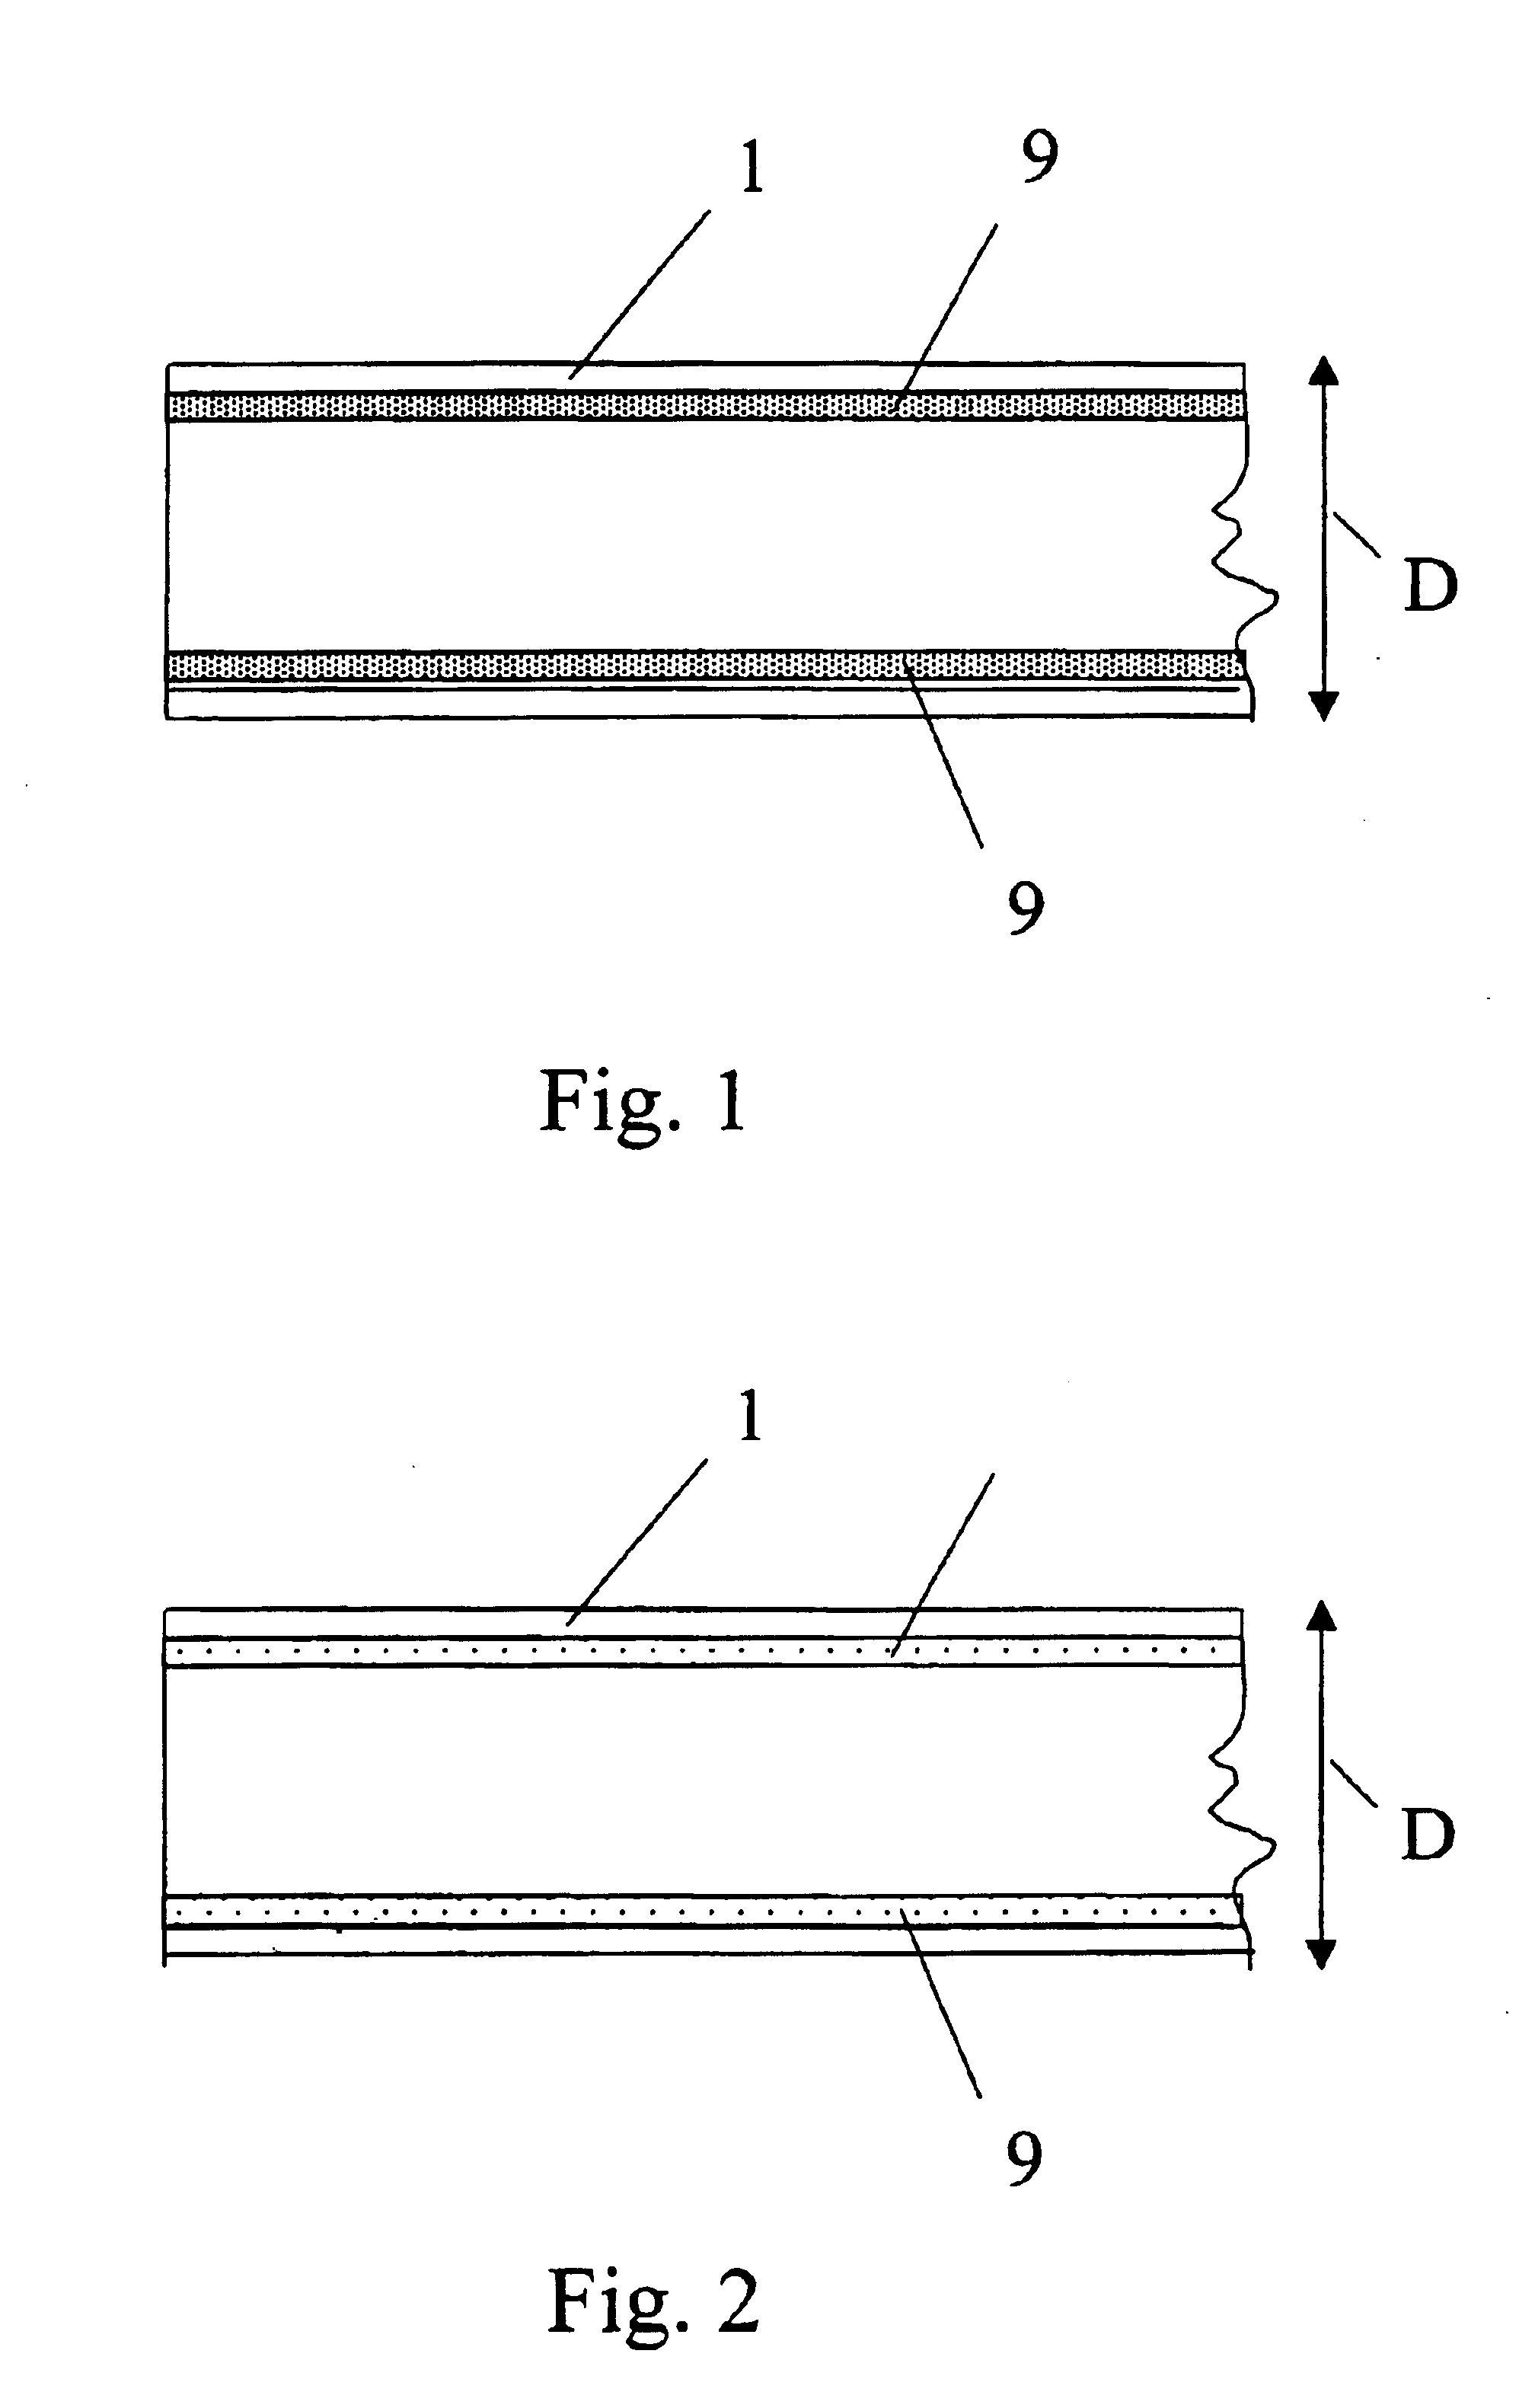 Method for recovering fluorescent material from faulty glass bodies of discharge lamps